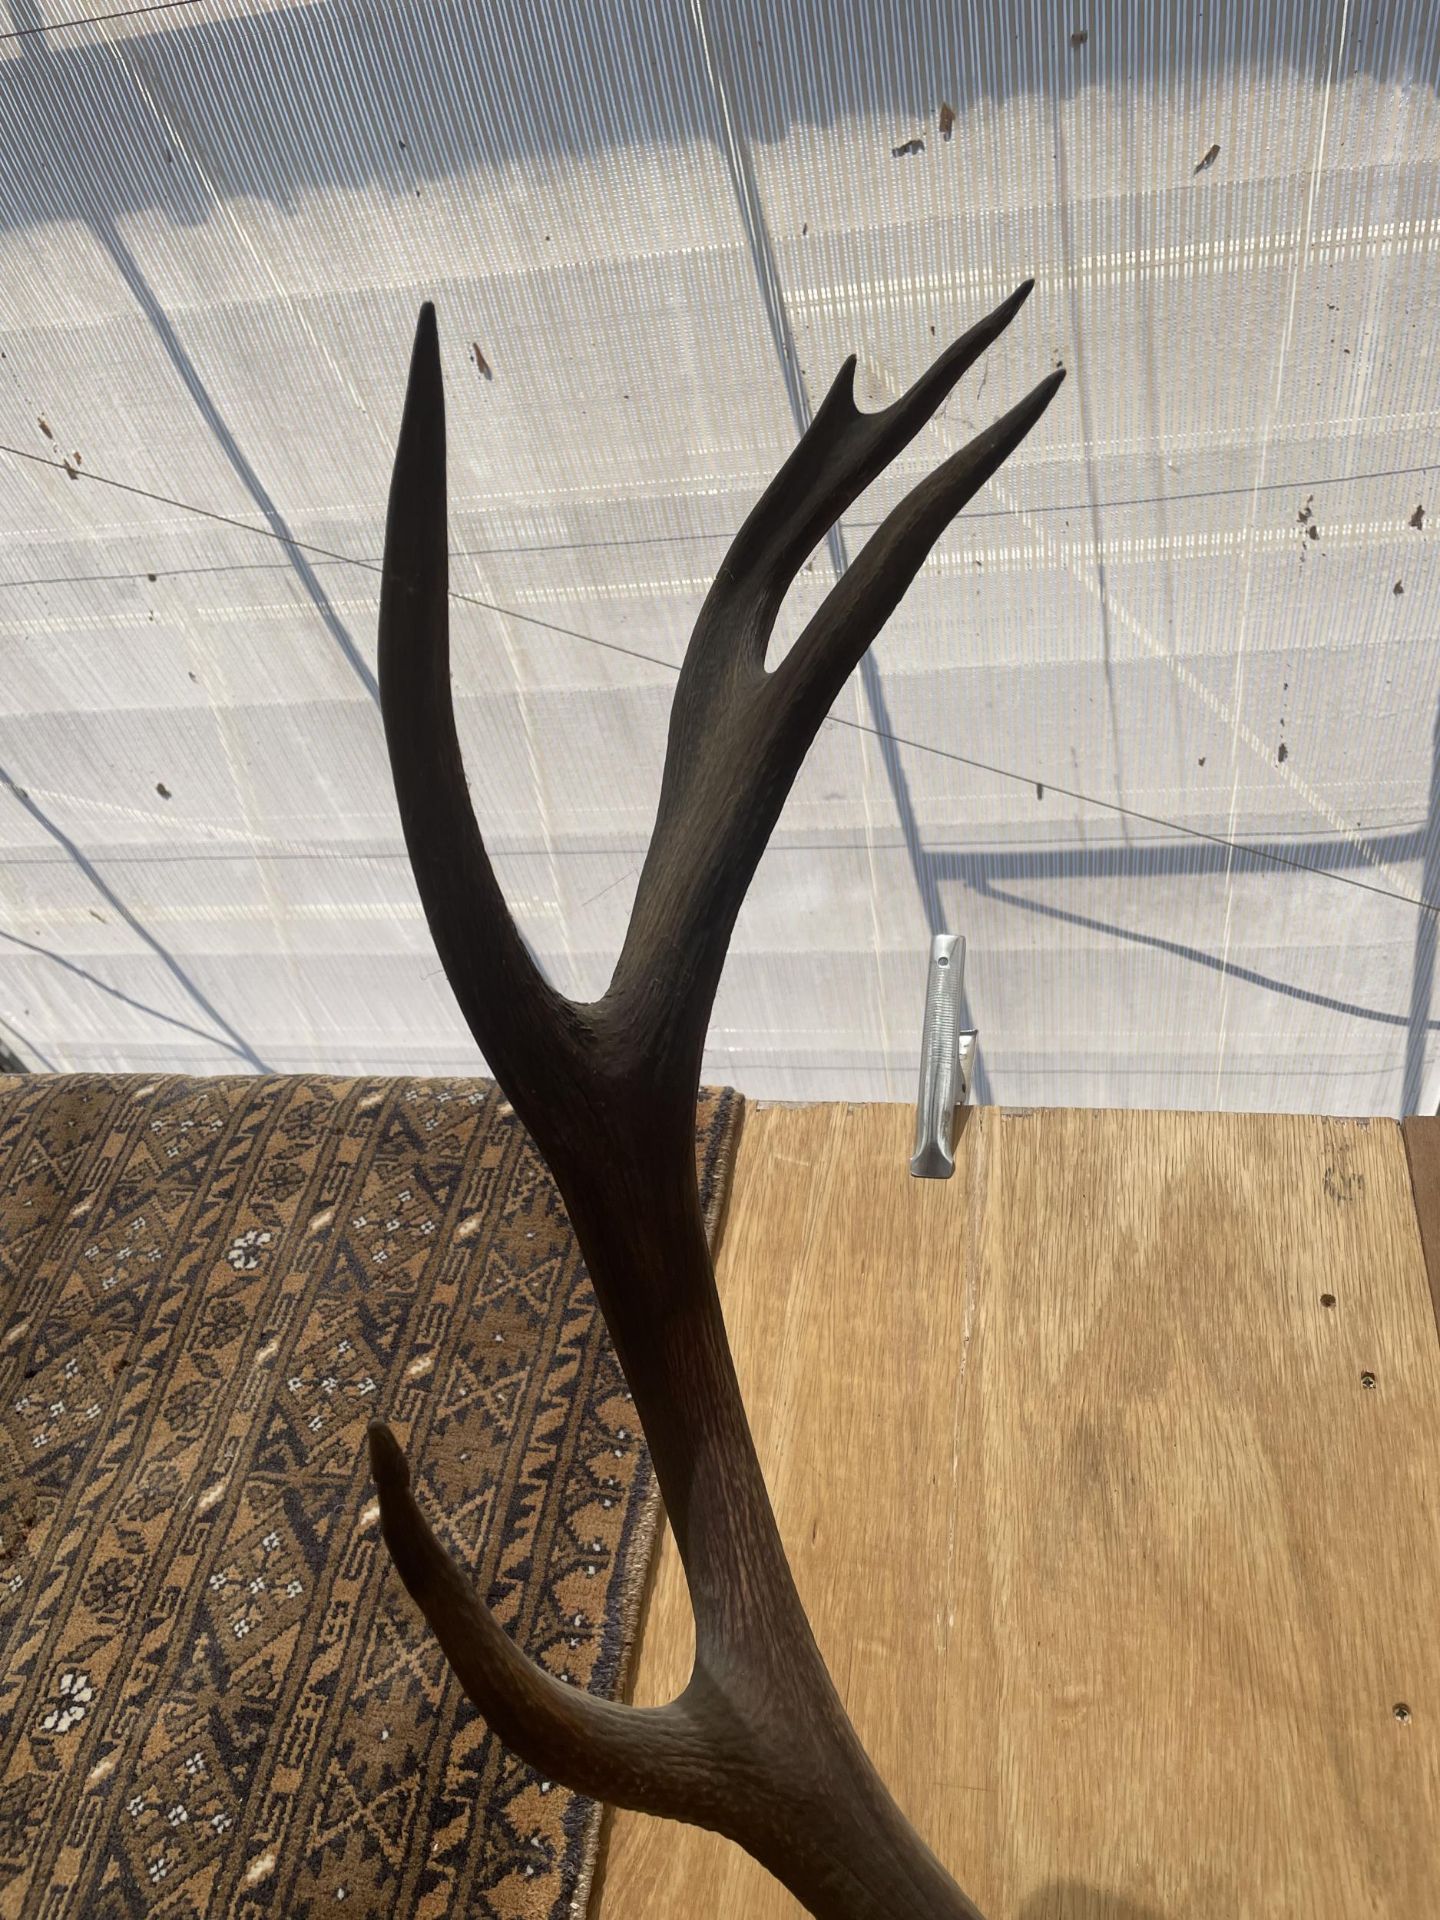 A PAIR OF ANTLERS MOUNTED ON A WOODEN PLINTH - Image 2 of 3